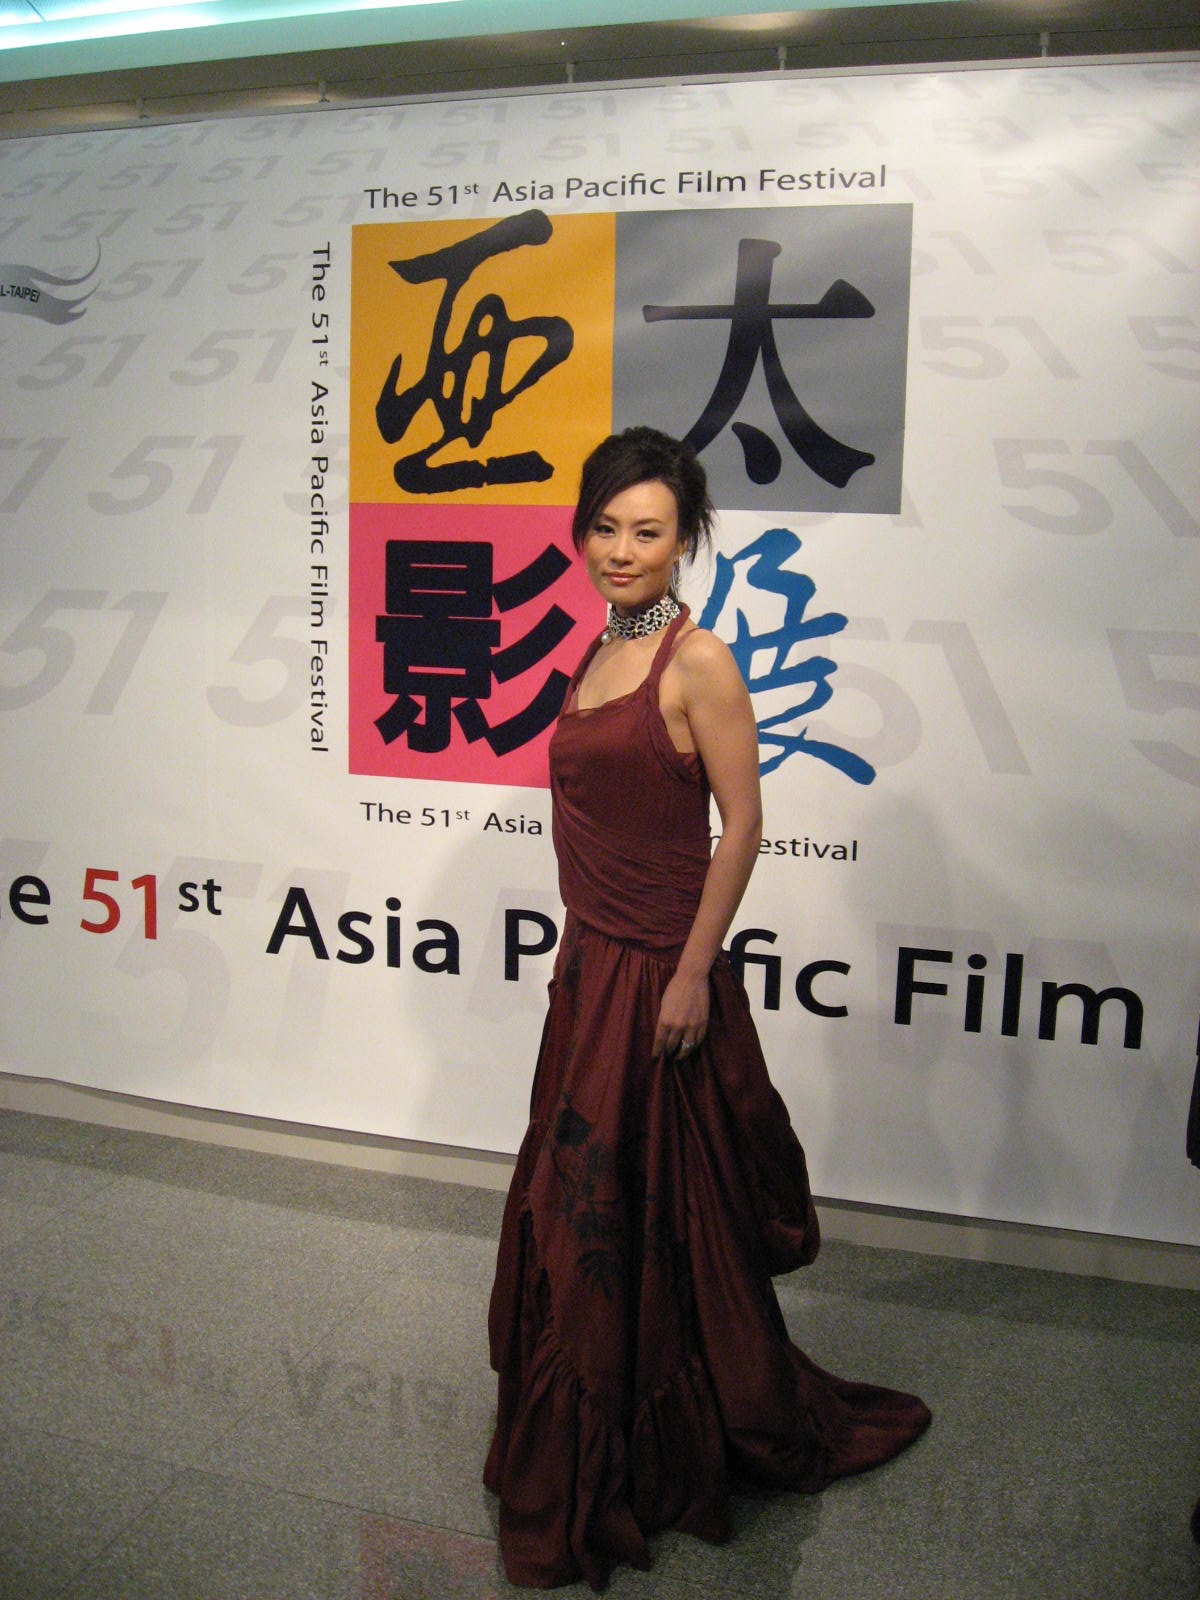 vivian wu at the 51st ASia Pacific Film Festival in Taiwan , 2007. (dresses in Dior)